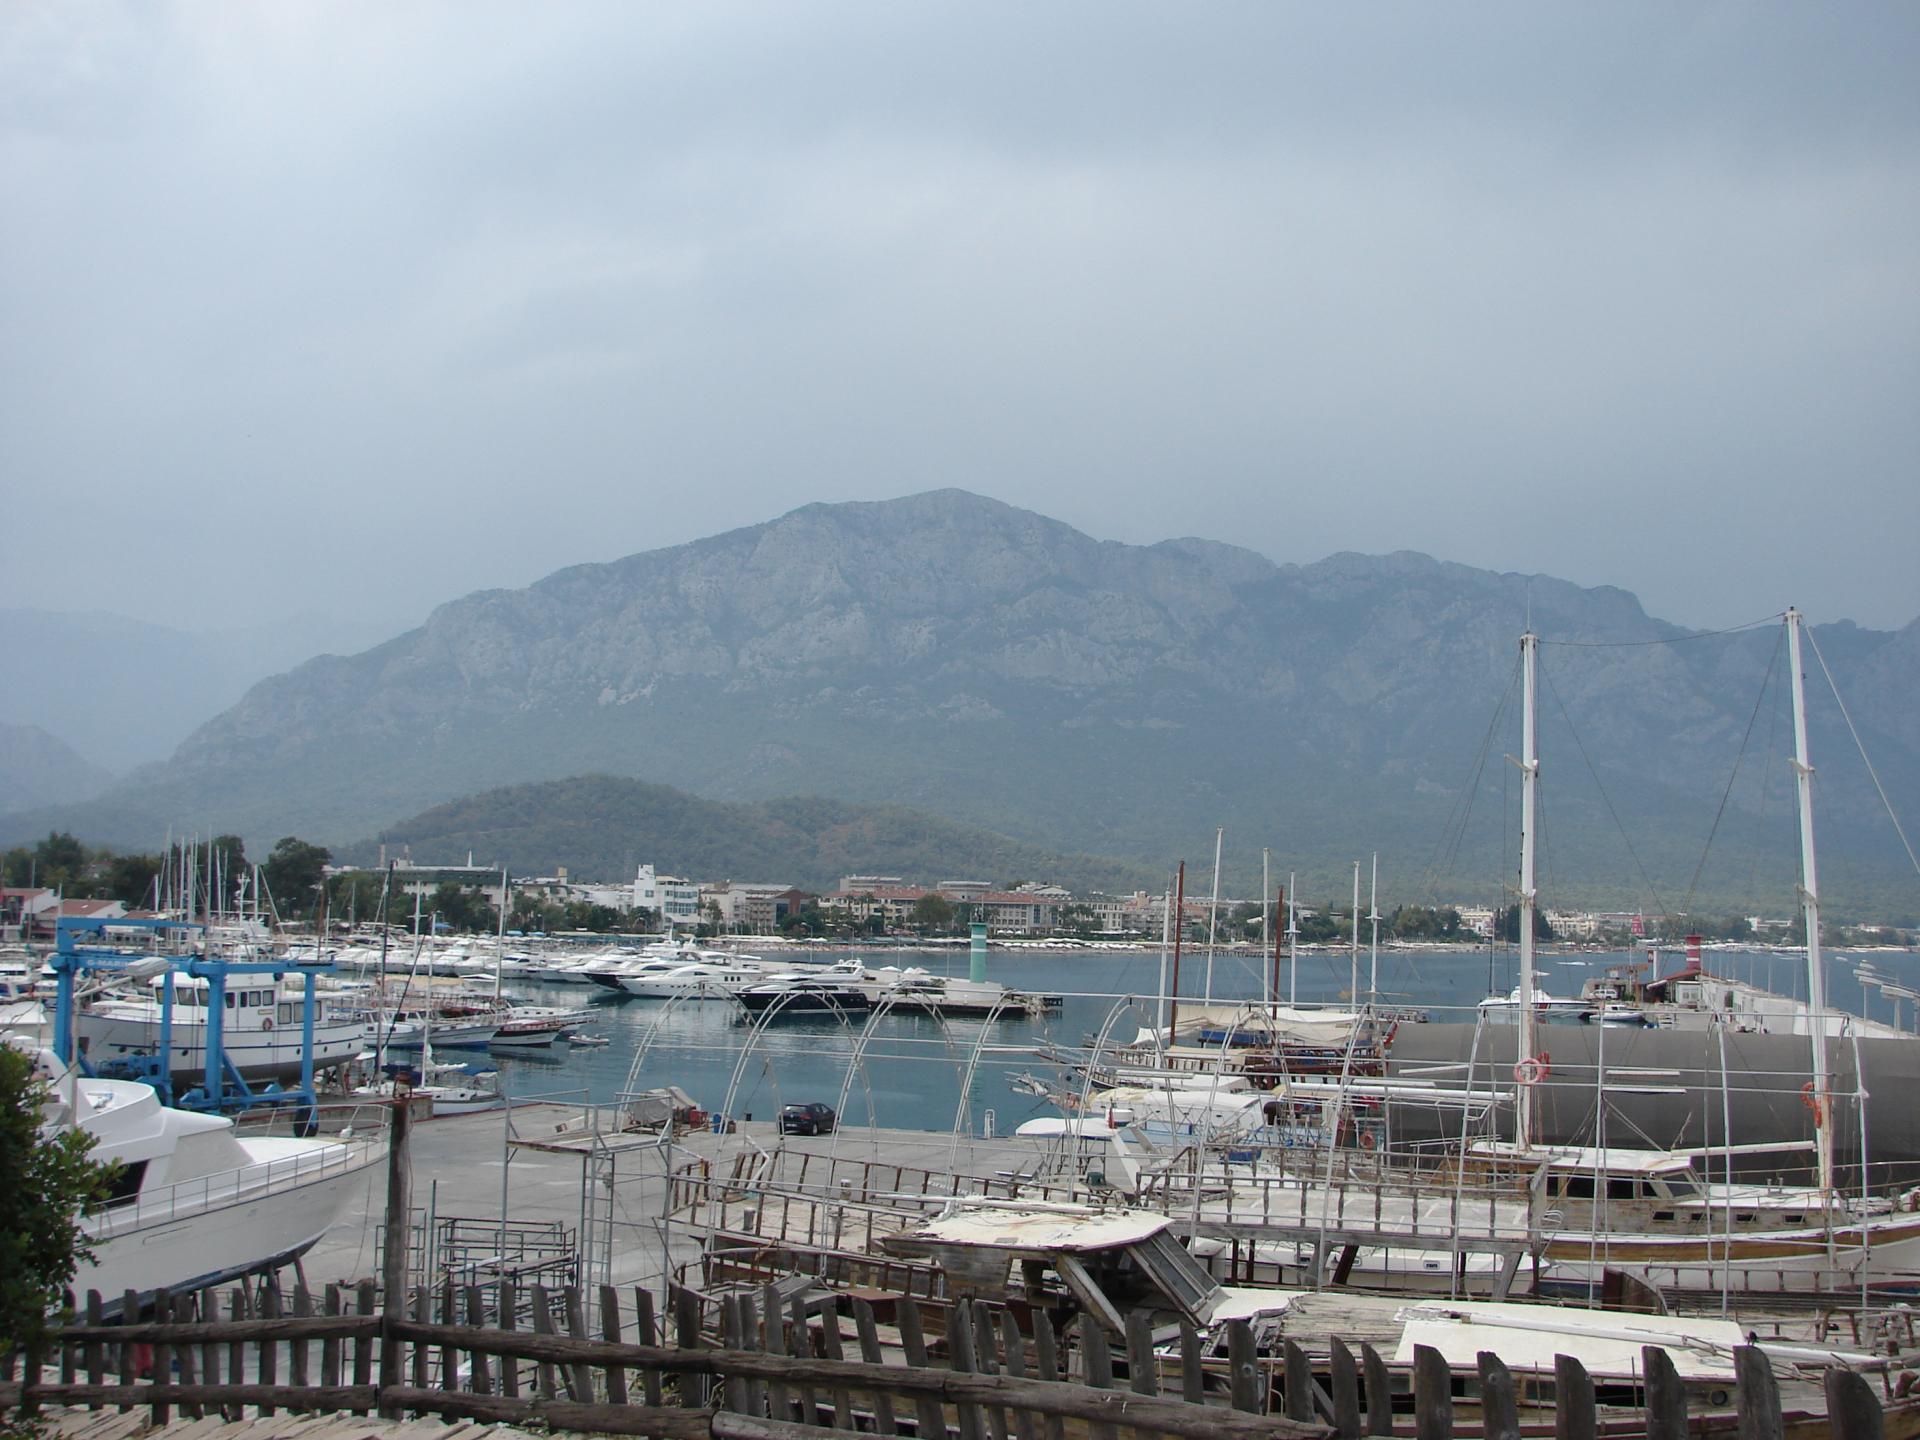 Kemer attractions